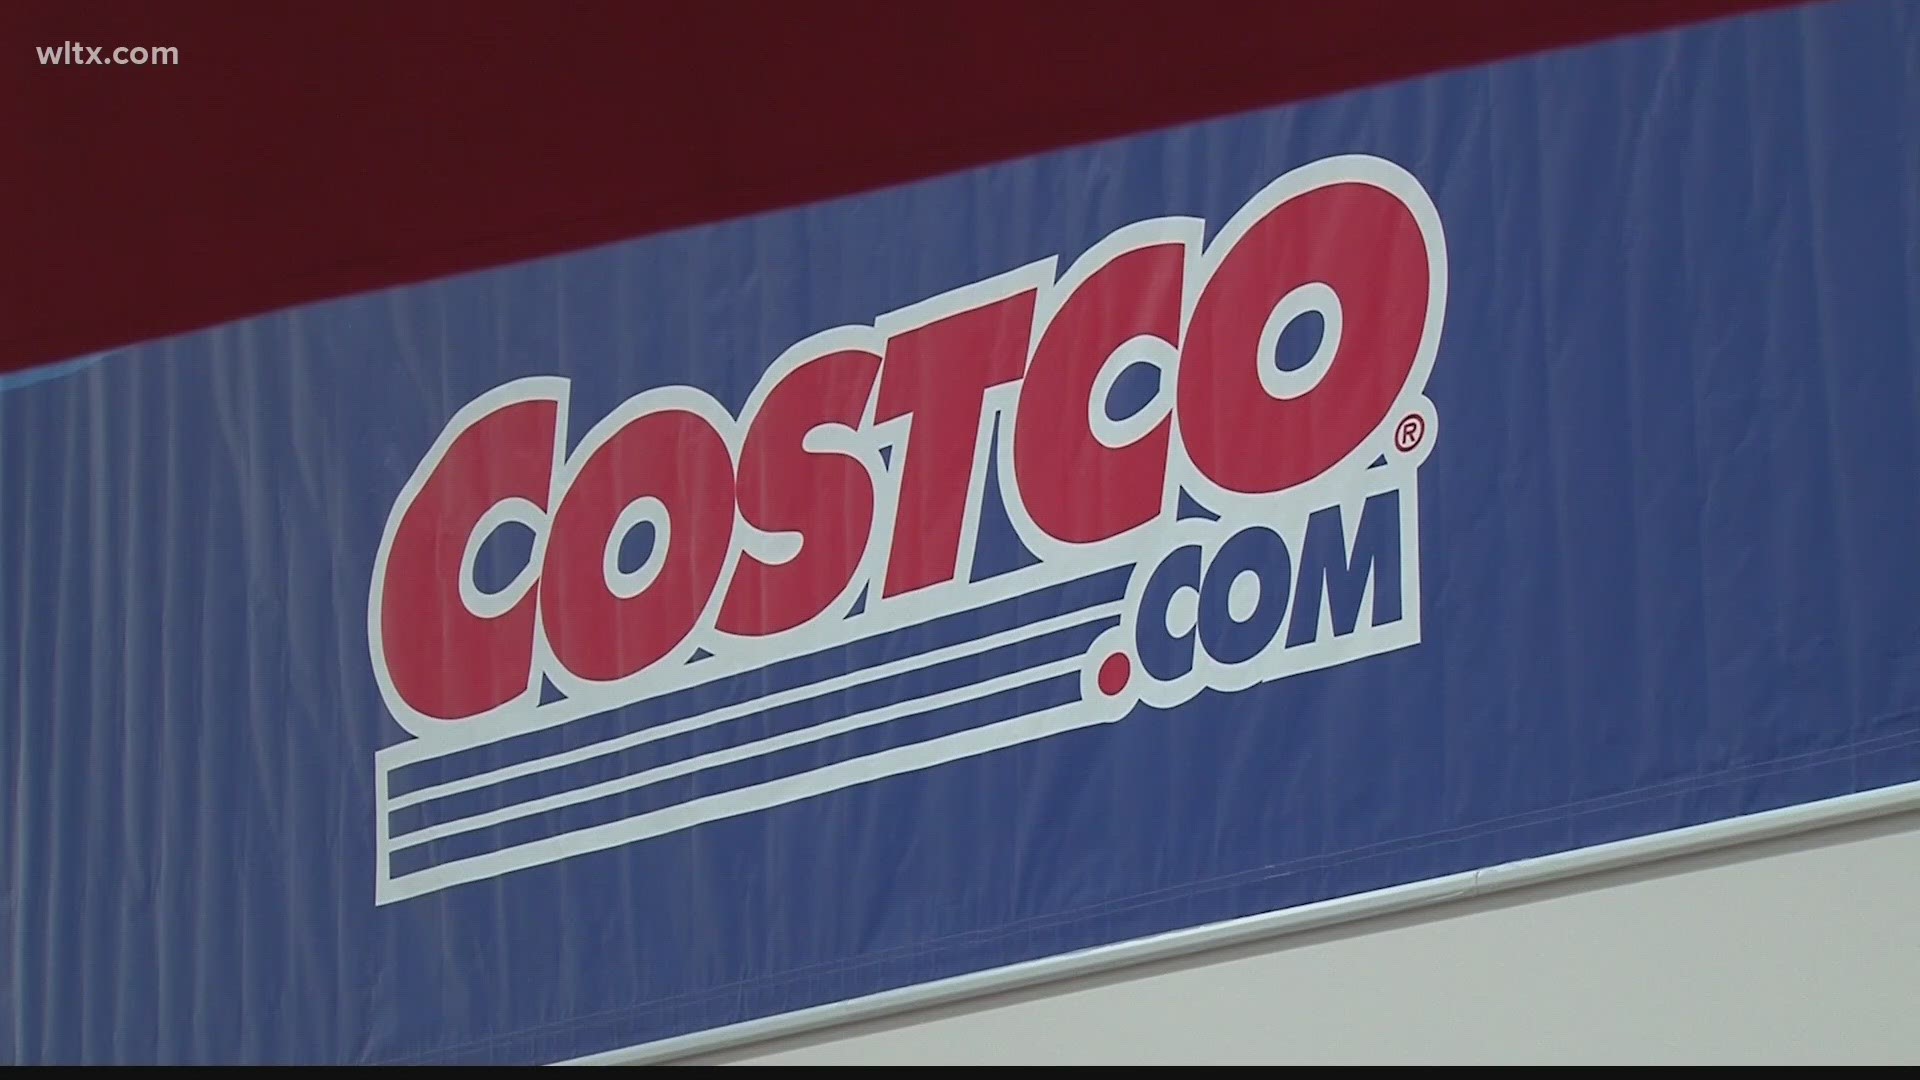 Costco is getting stricter about enforcing its membership rules after seeing more non-members using membership cards that don't belong to them at self-checkouts.